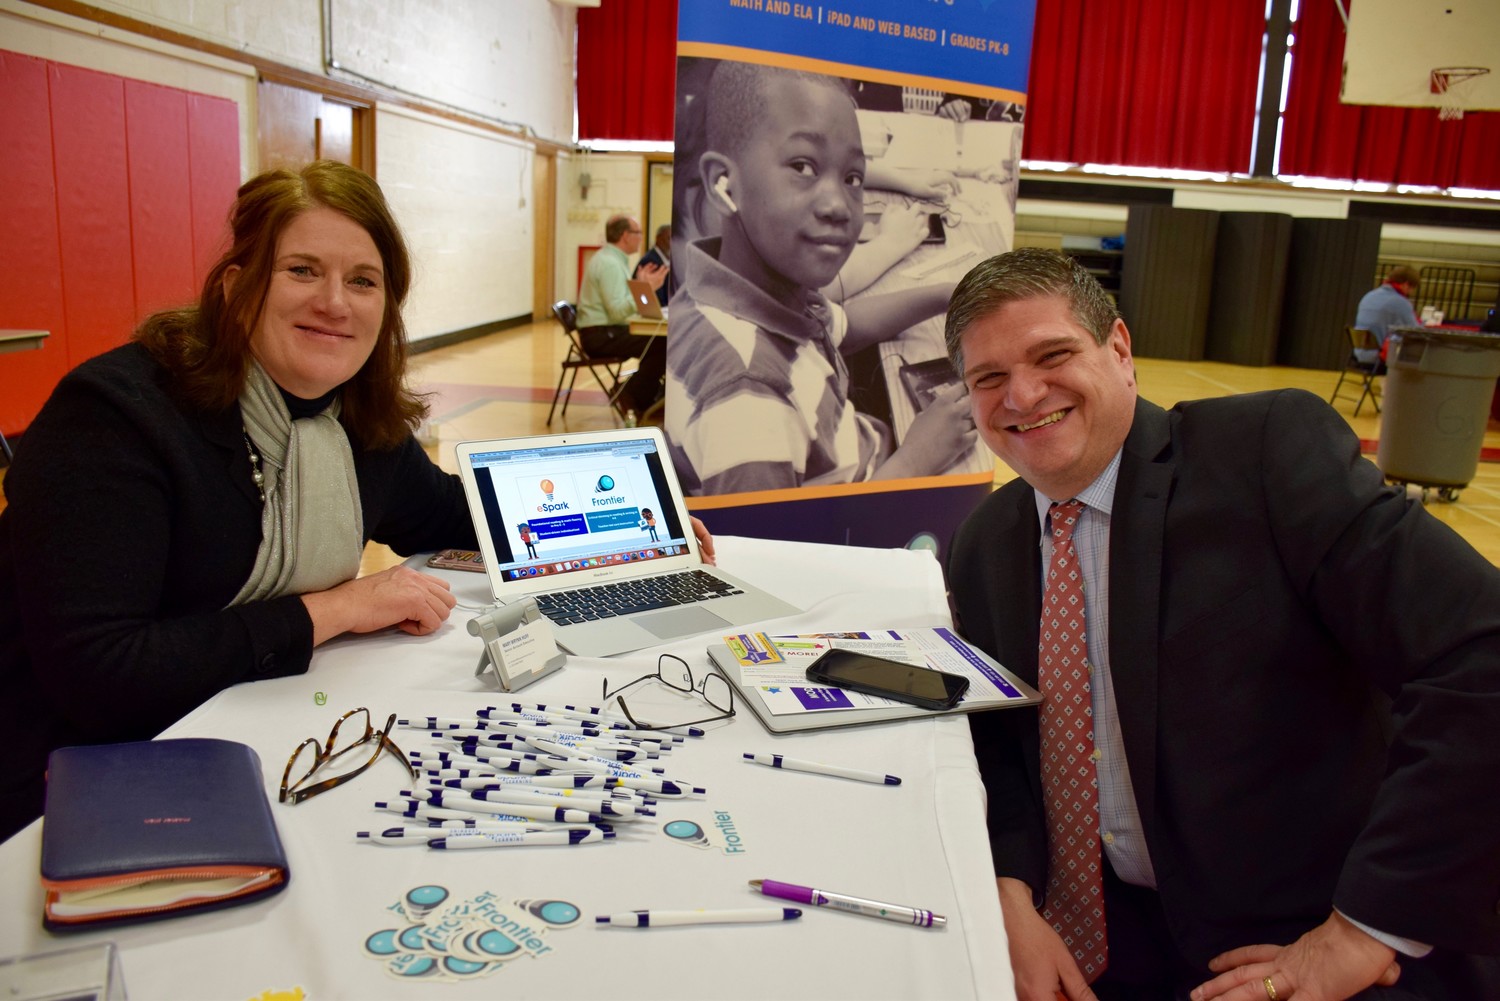 Mary Wrynn Huff, senior account executive at eSpark Learning, met with Dr. David Casamento, assistant superintendent for curriculum and instruction in the East Meadow School District.